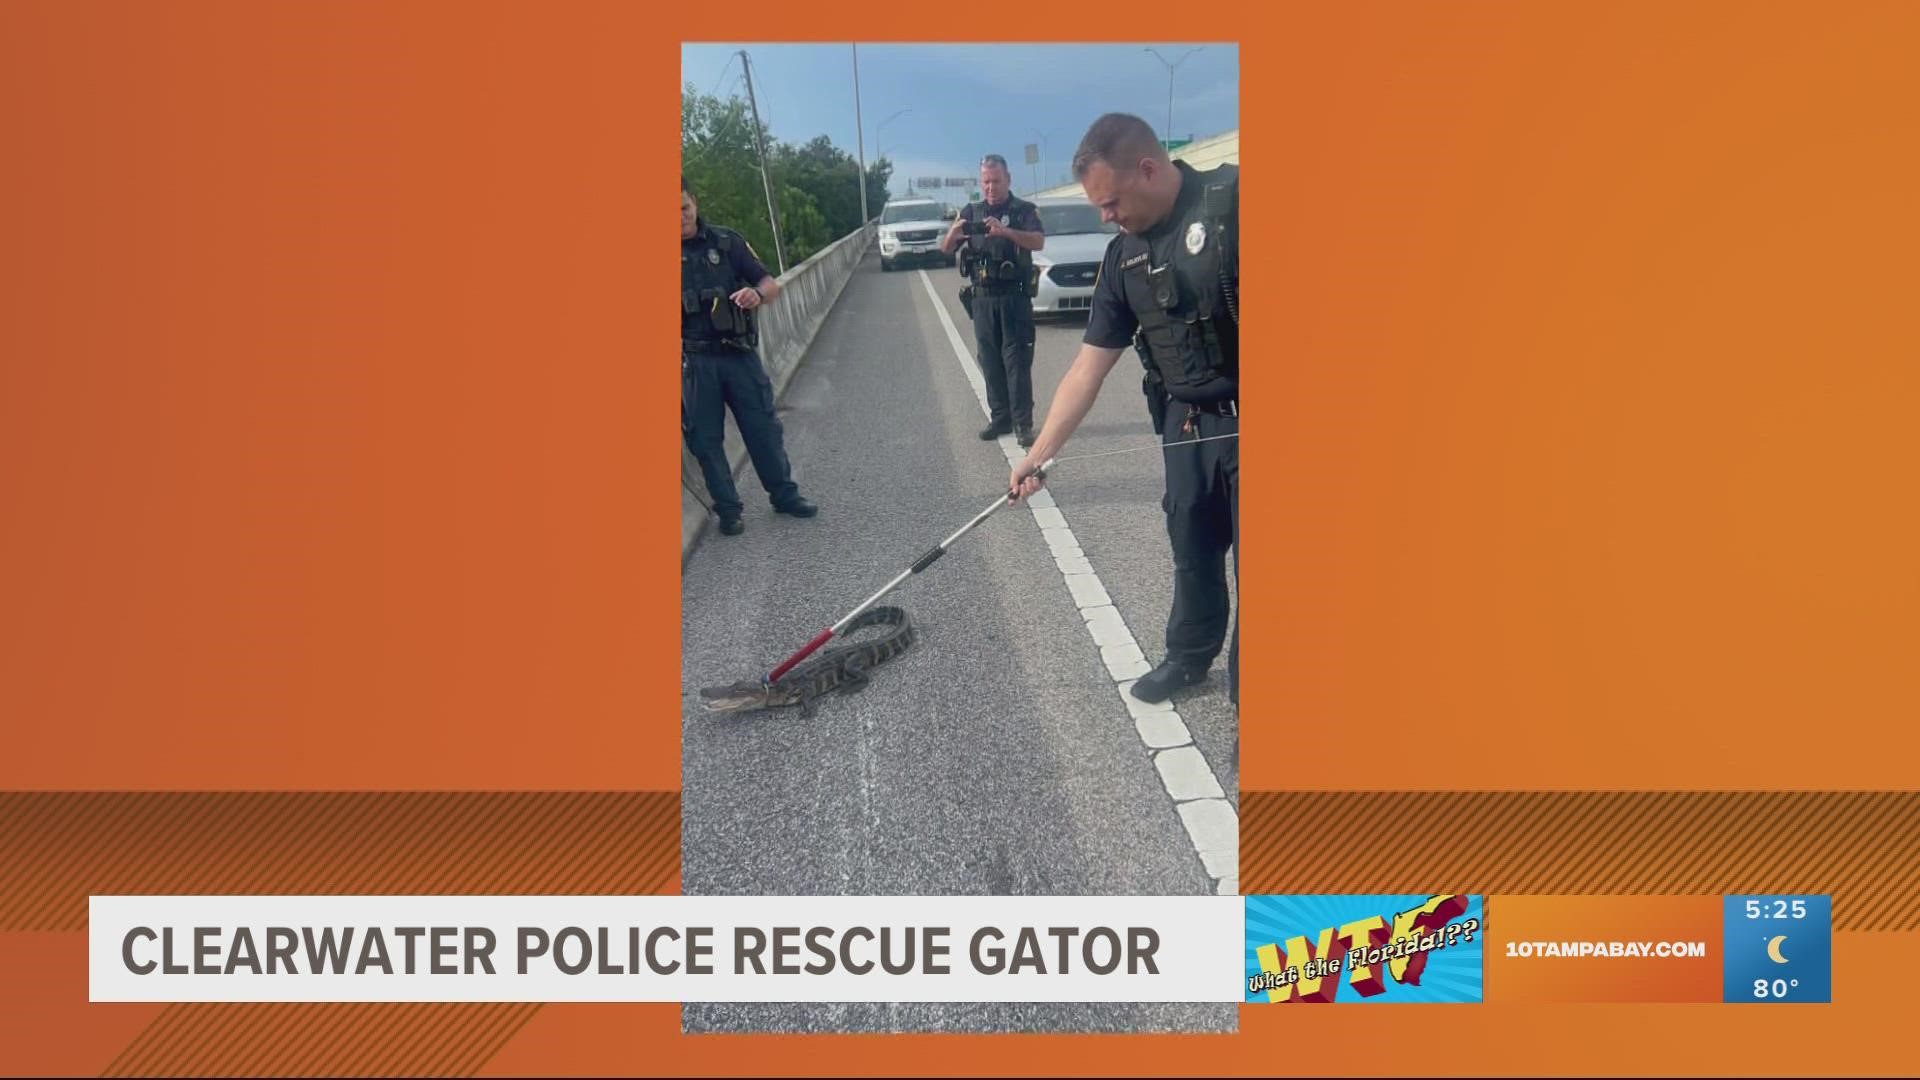 The reptile was safely relocated by a trapper after it was found, police say.